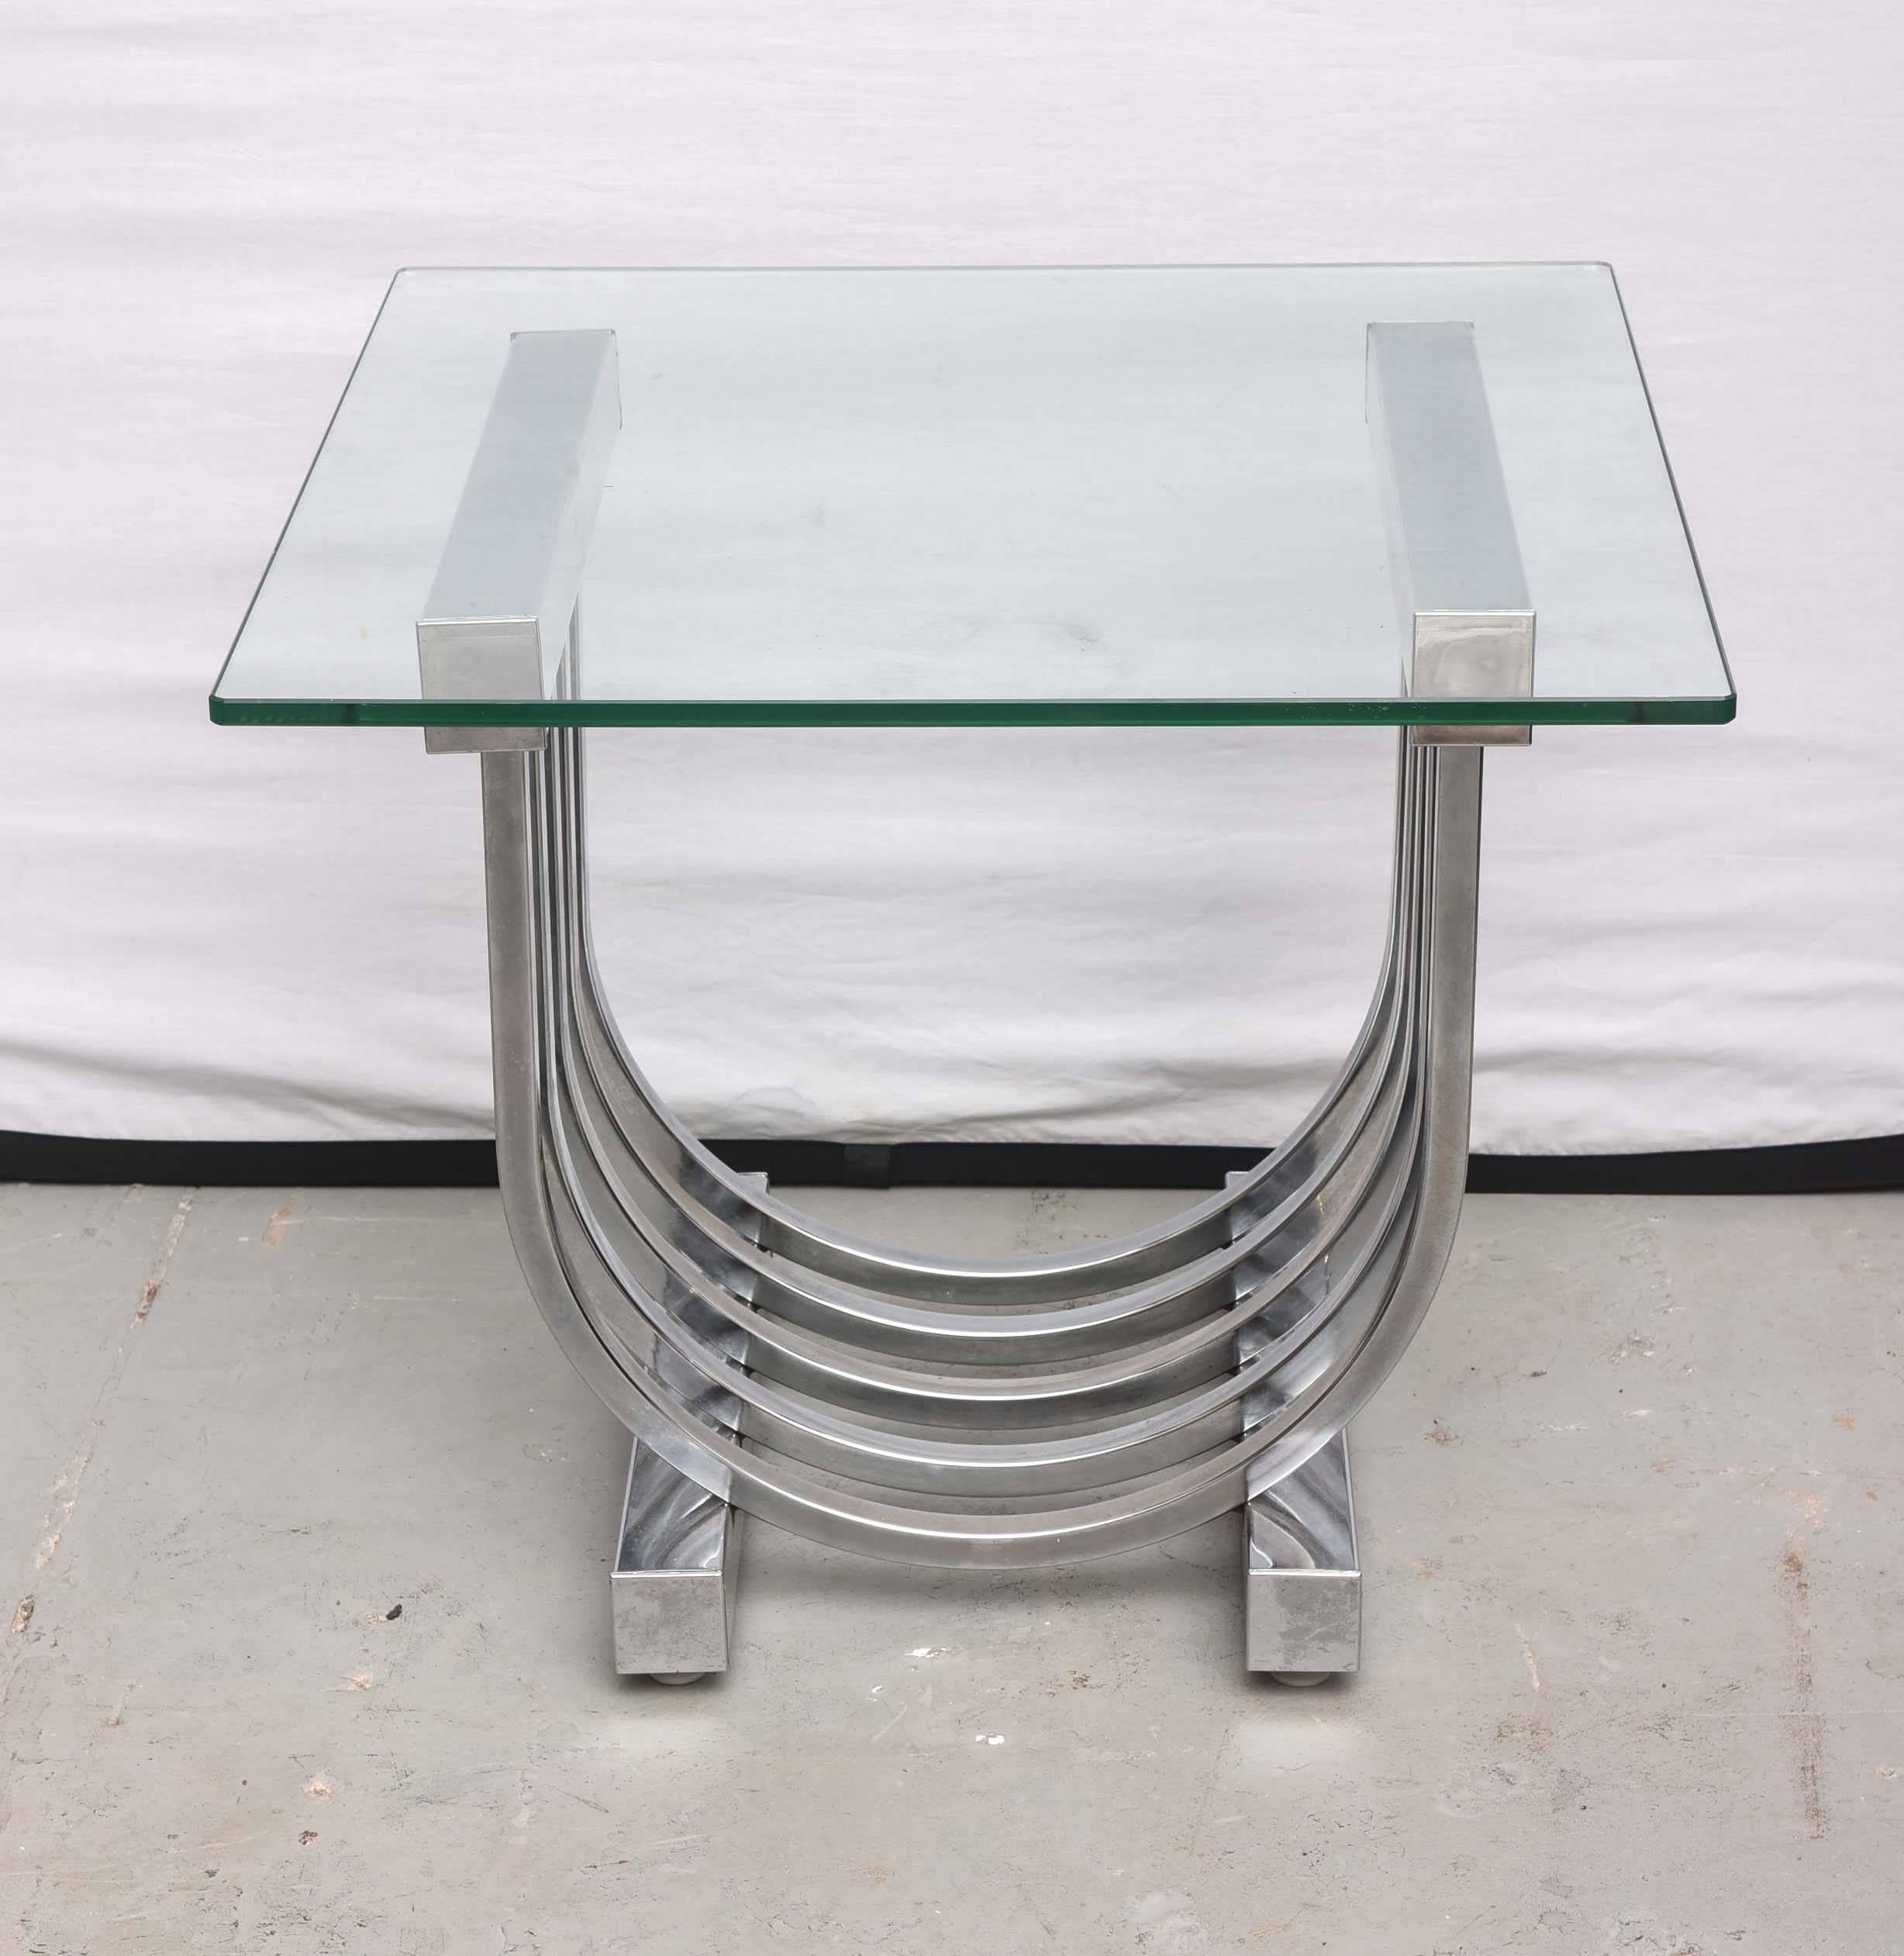 Beautiful chrome and glass side table by Donald Deskey, 1960s, USA.